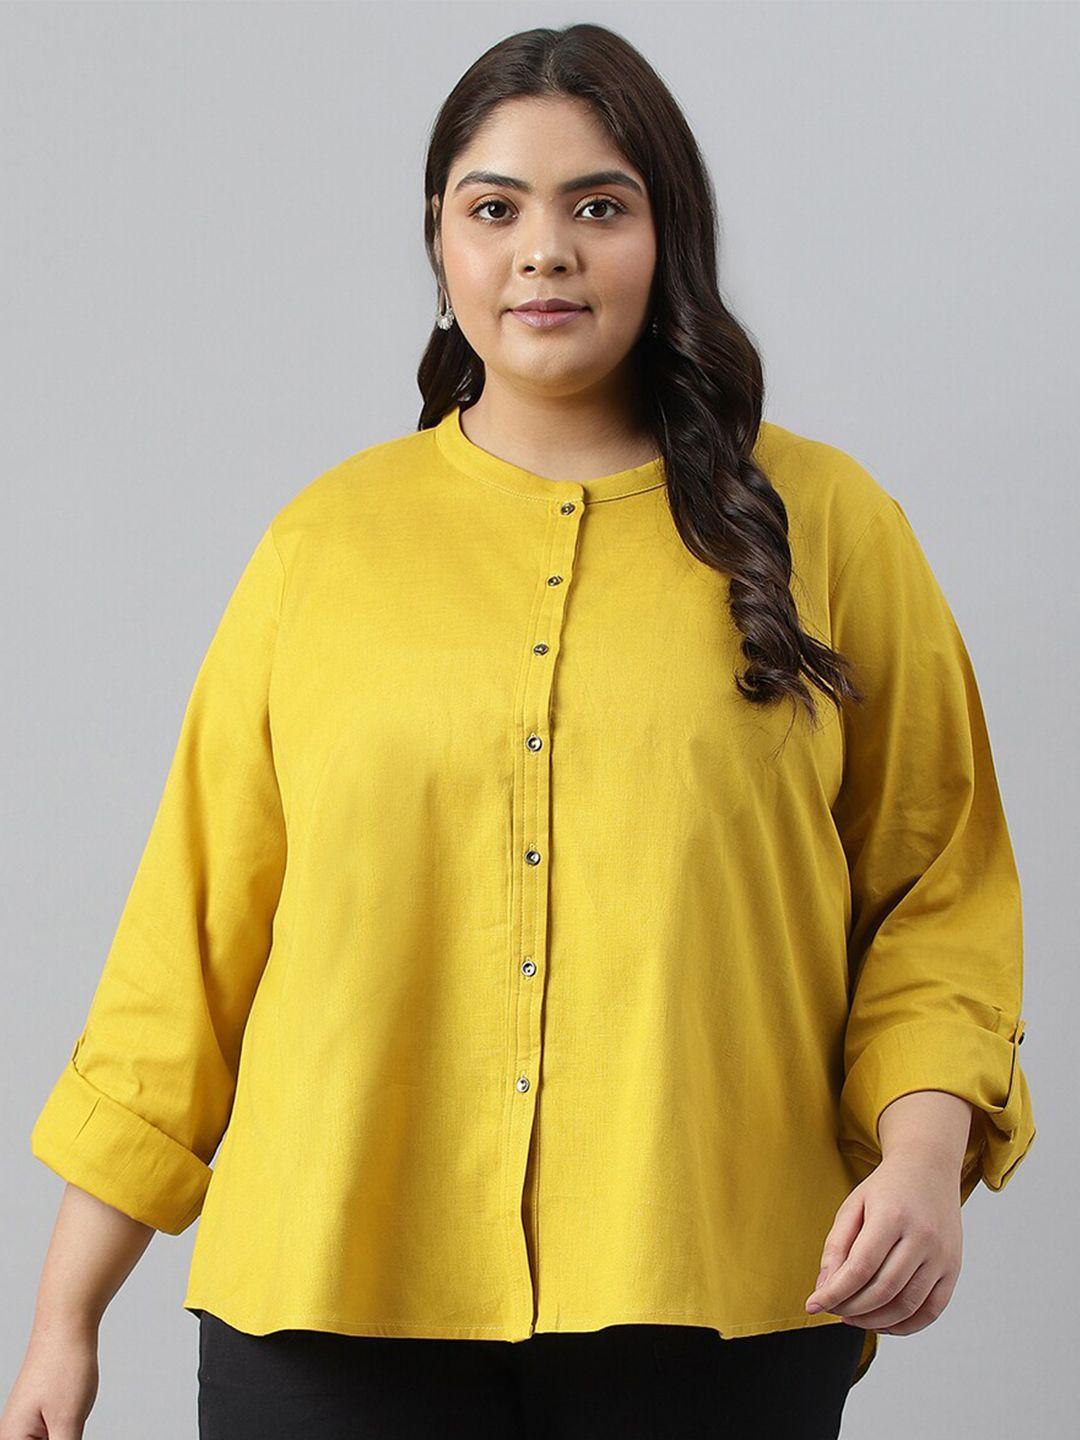 w-plus-size-cotton-roll-up-sleeves-shirt-style-top